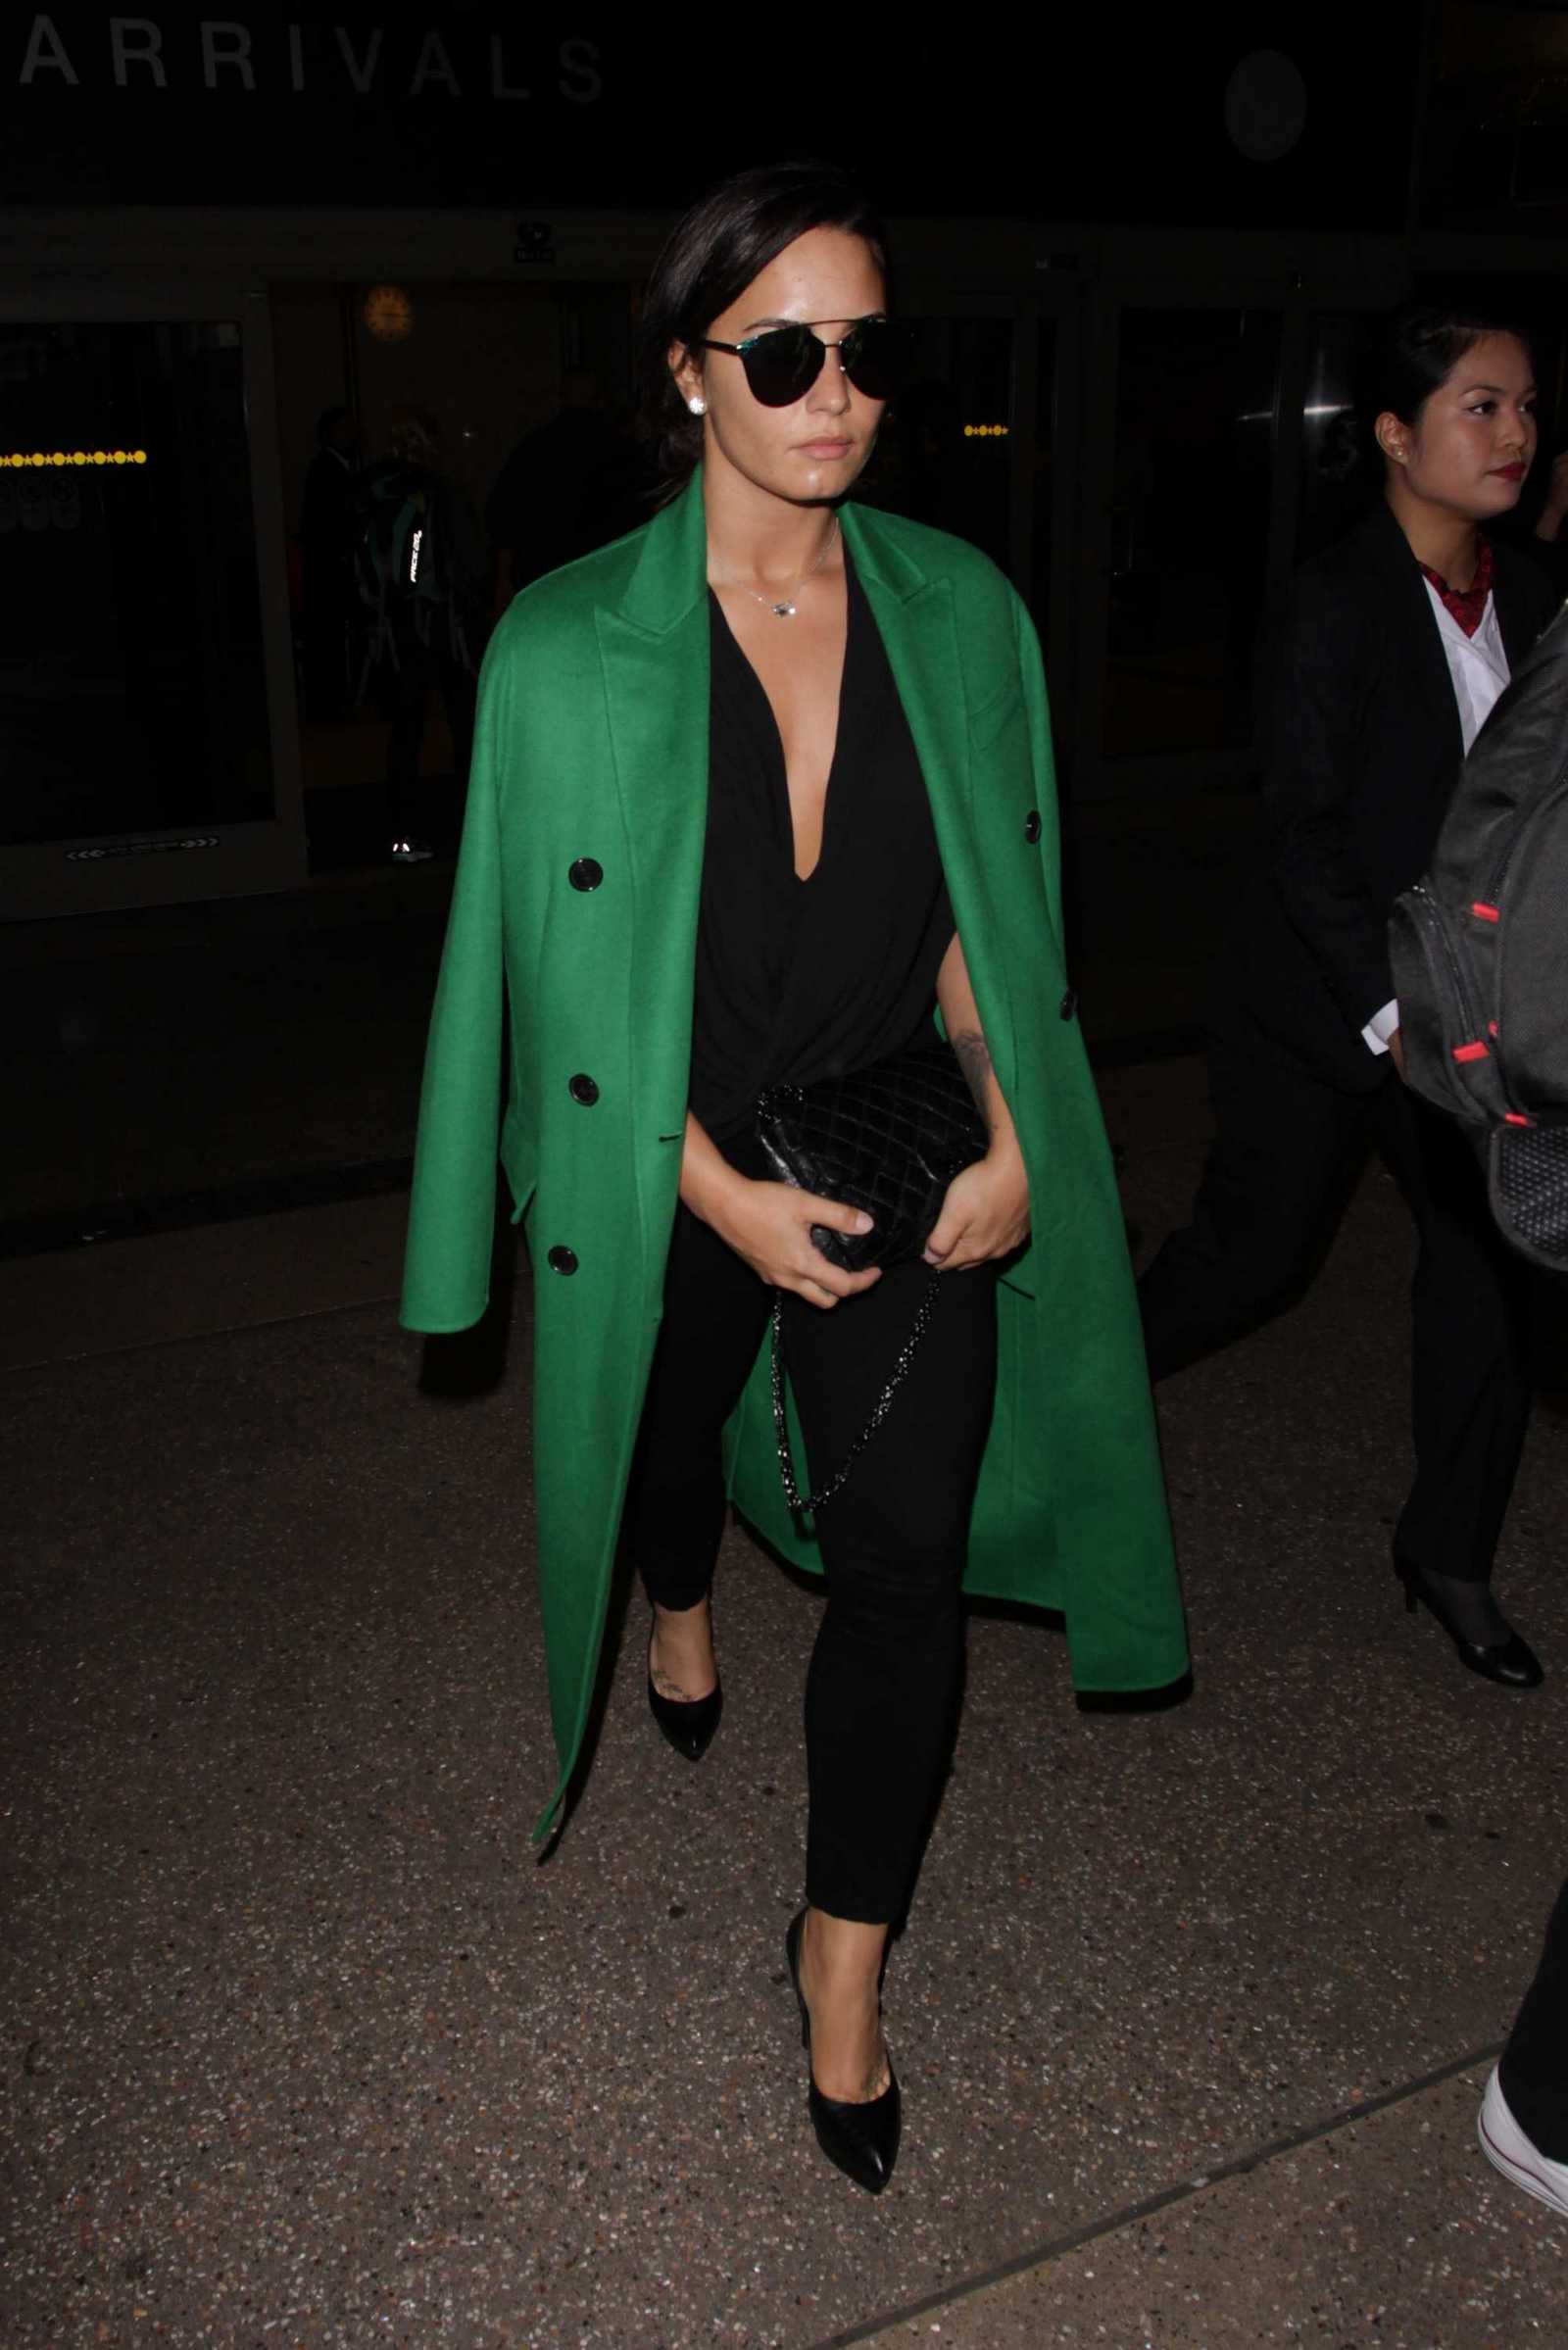 Demi_Lovato_-_Arrives_to_LAX_in_Los_Angeles_on_Feb_5-07.jpg